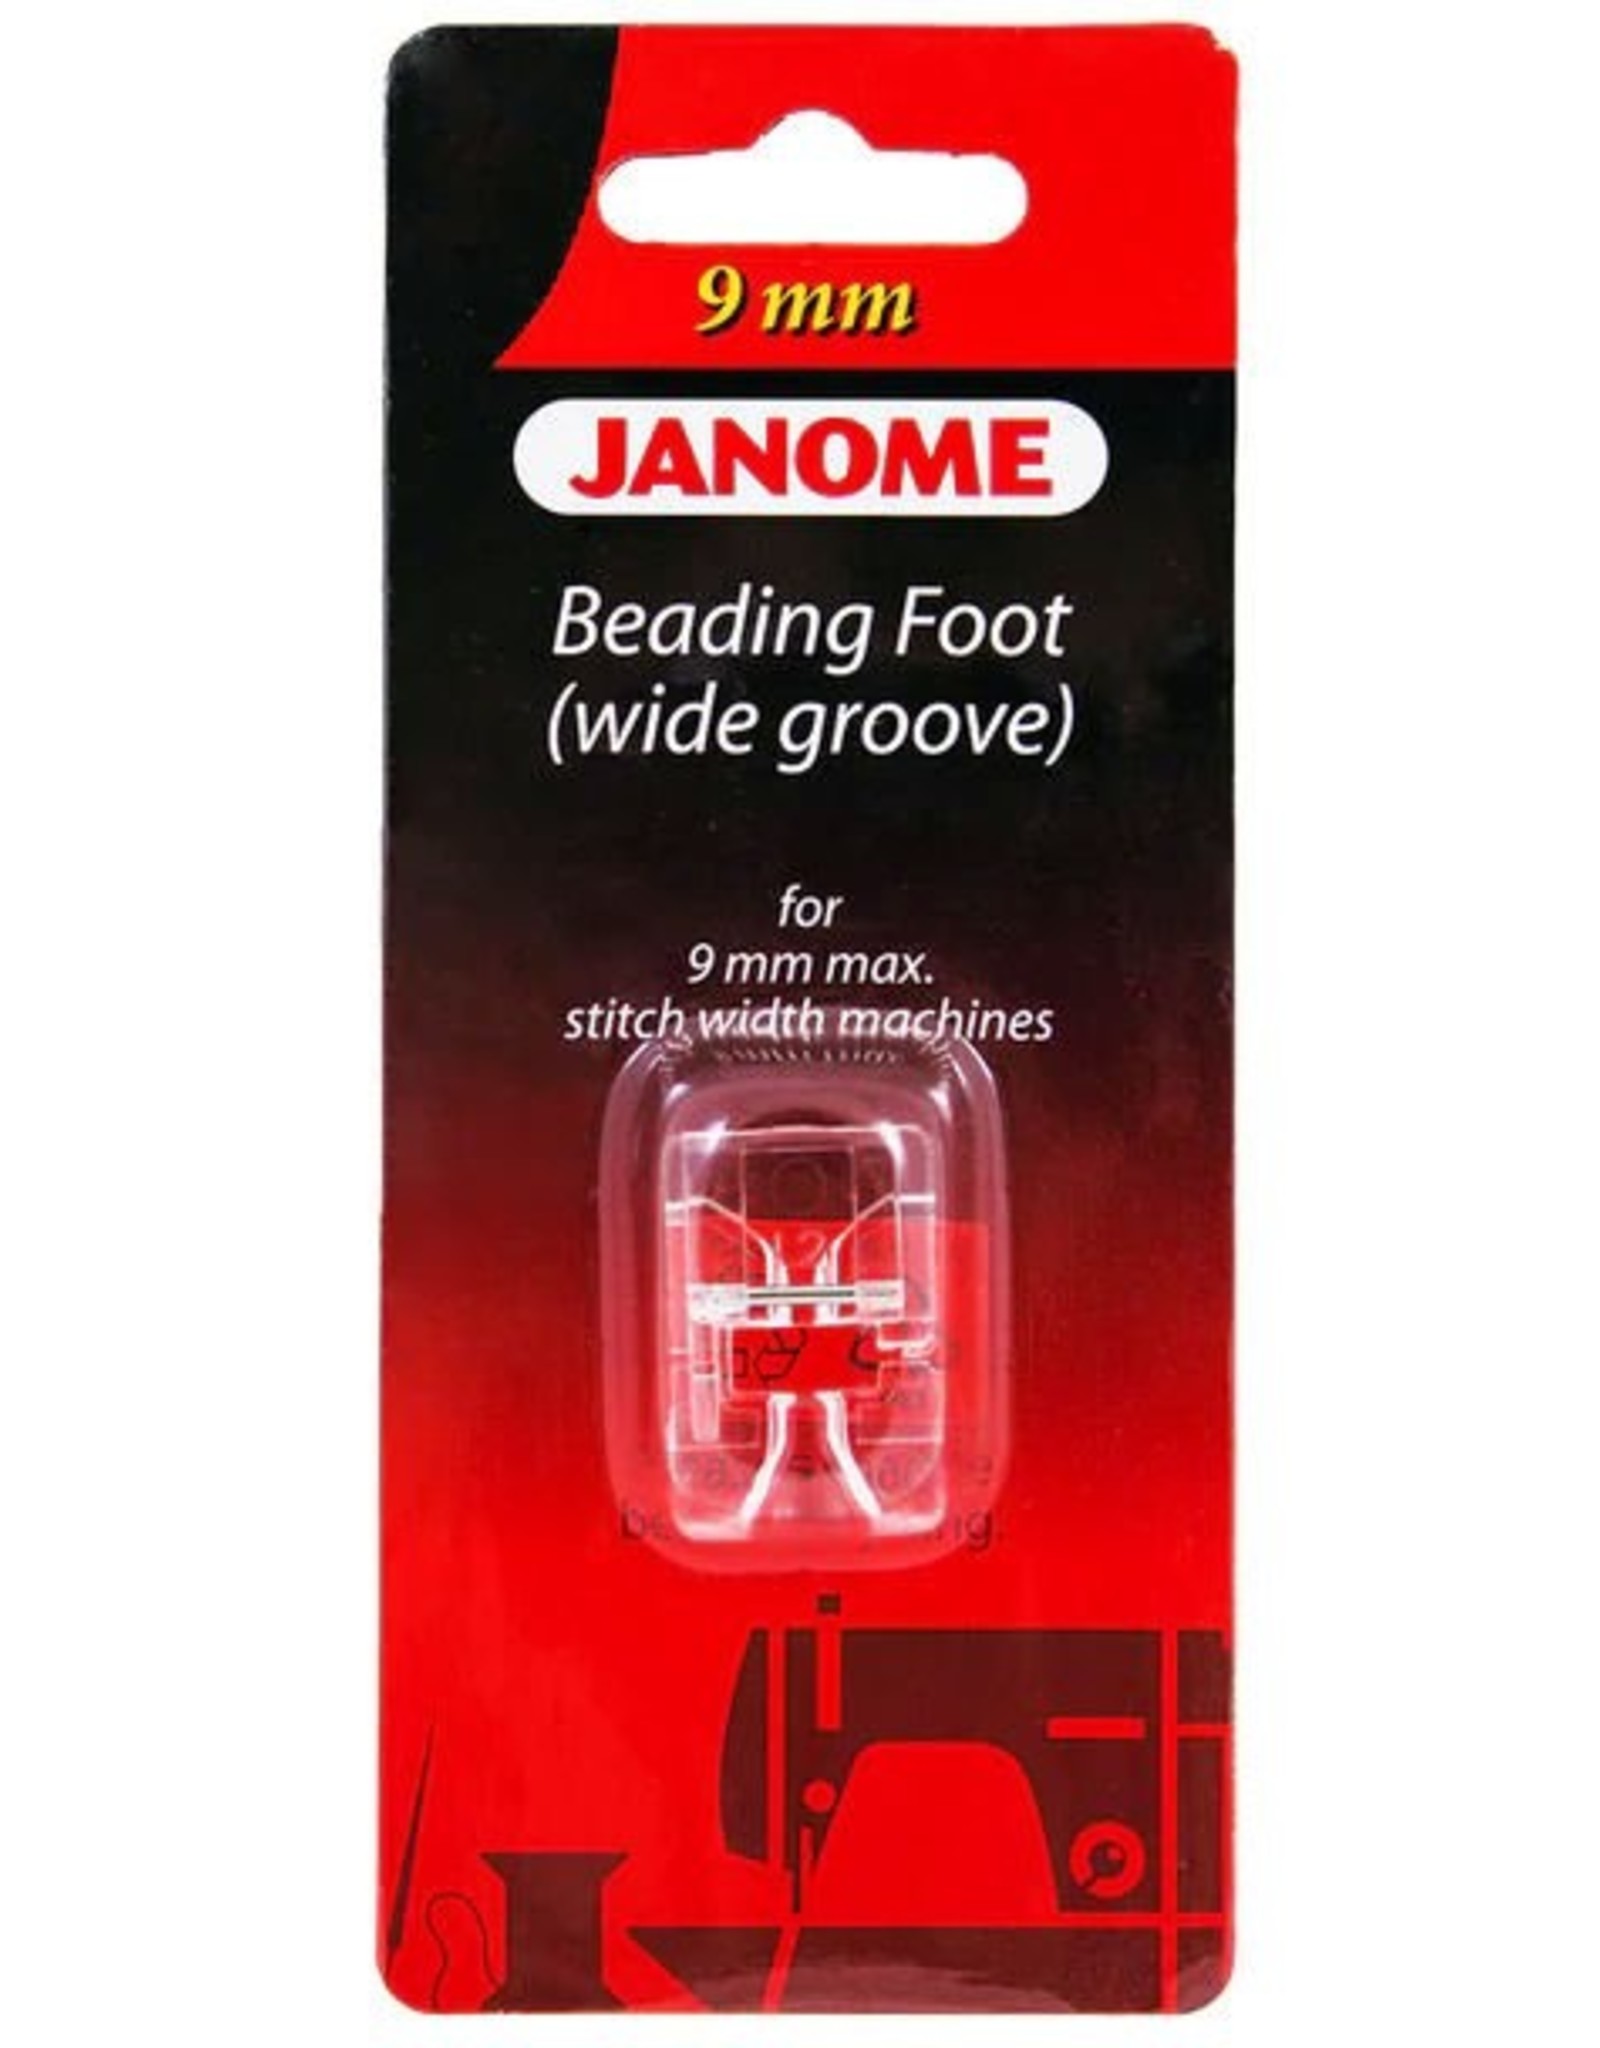 Beading foot wide groove - 202098007